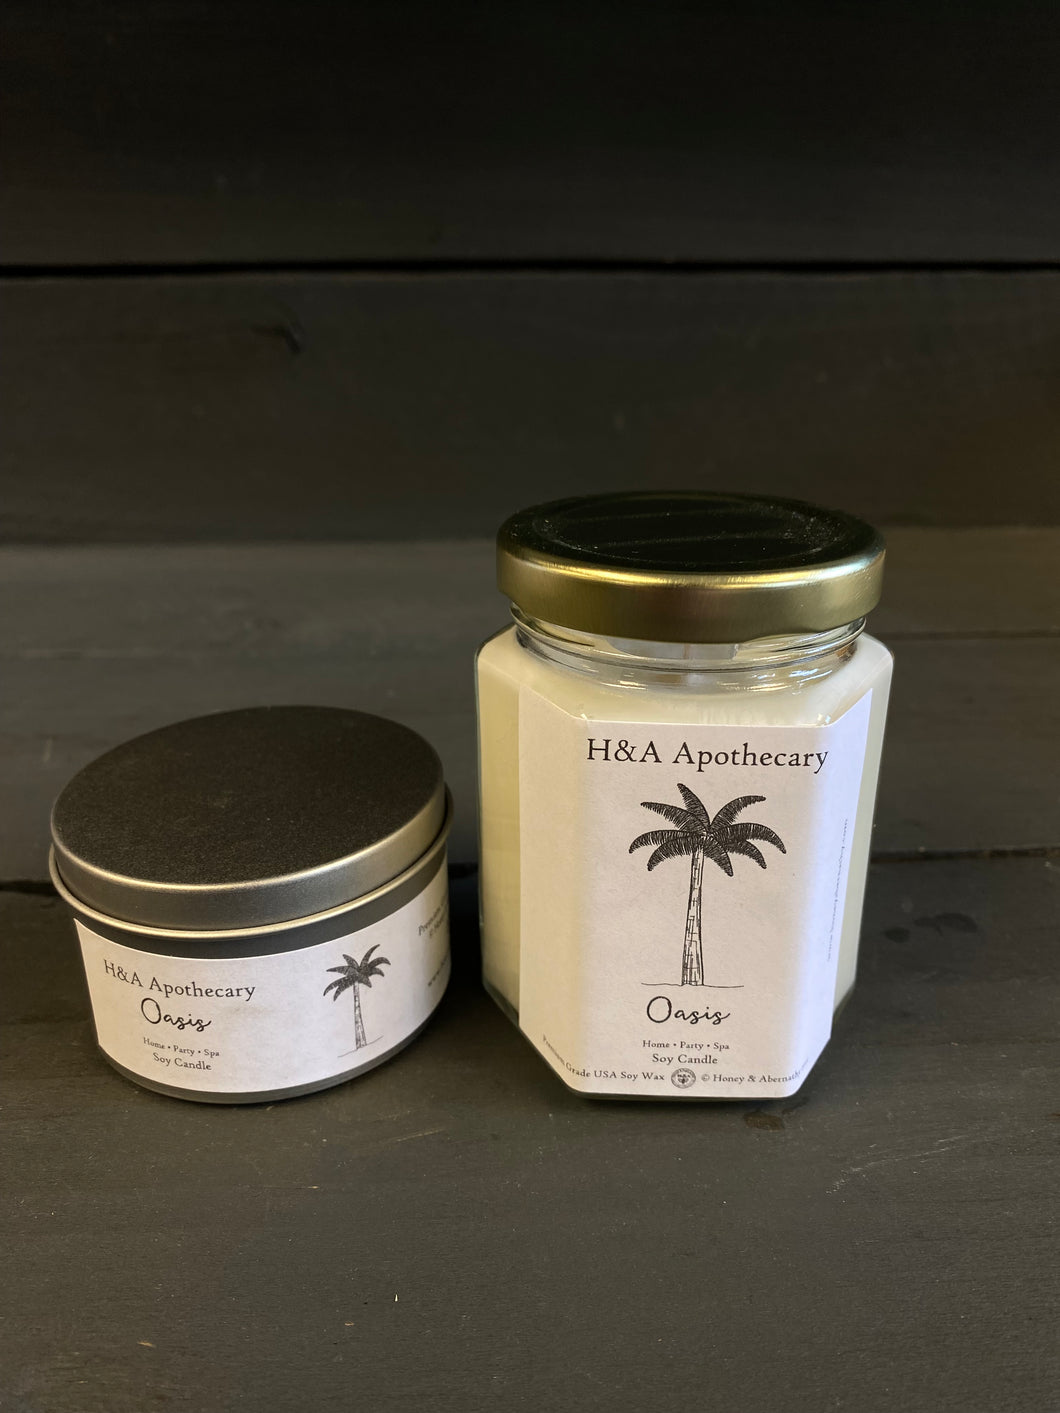 H&A Apothecary Oasis Soy Candle